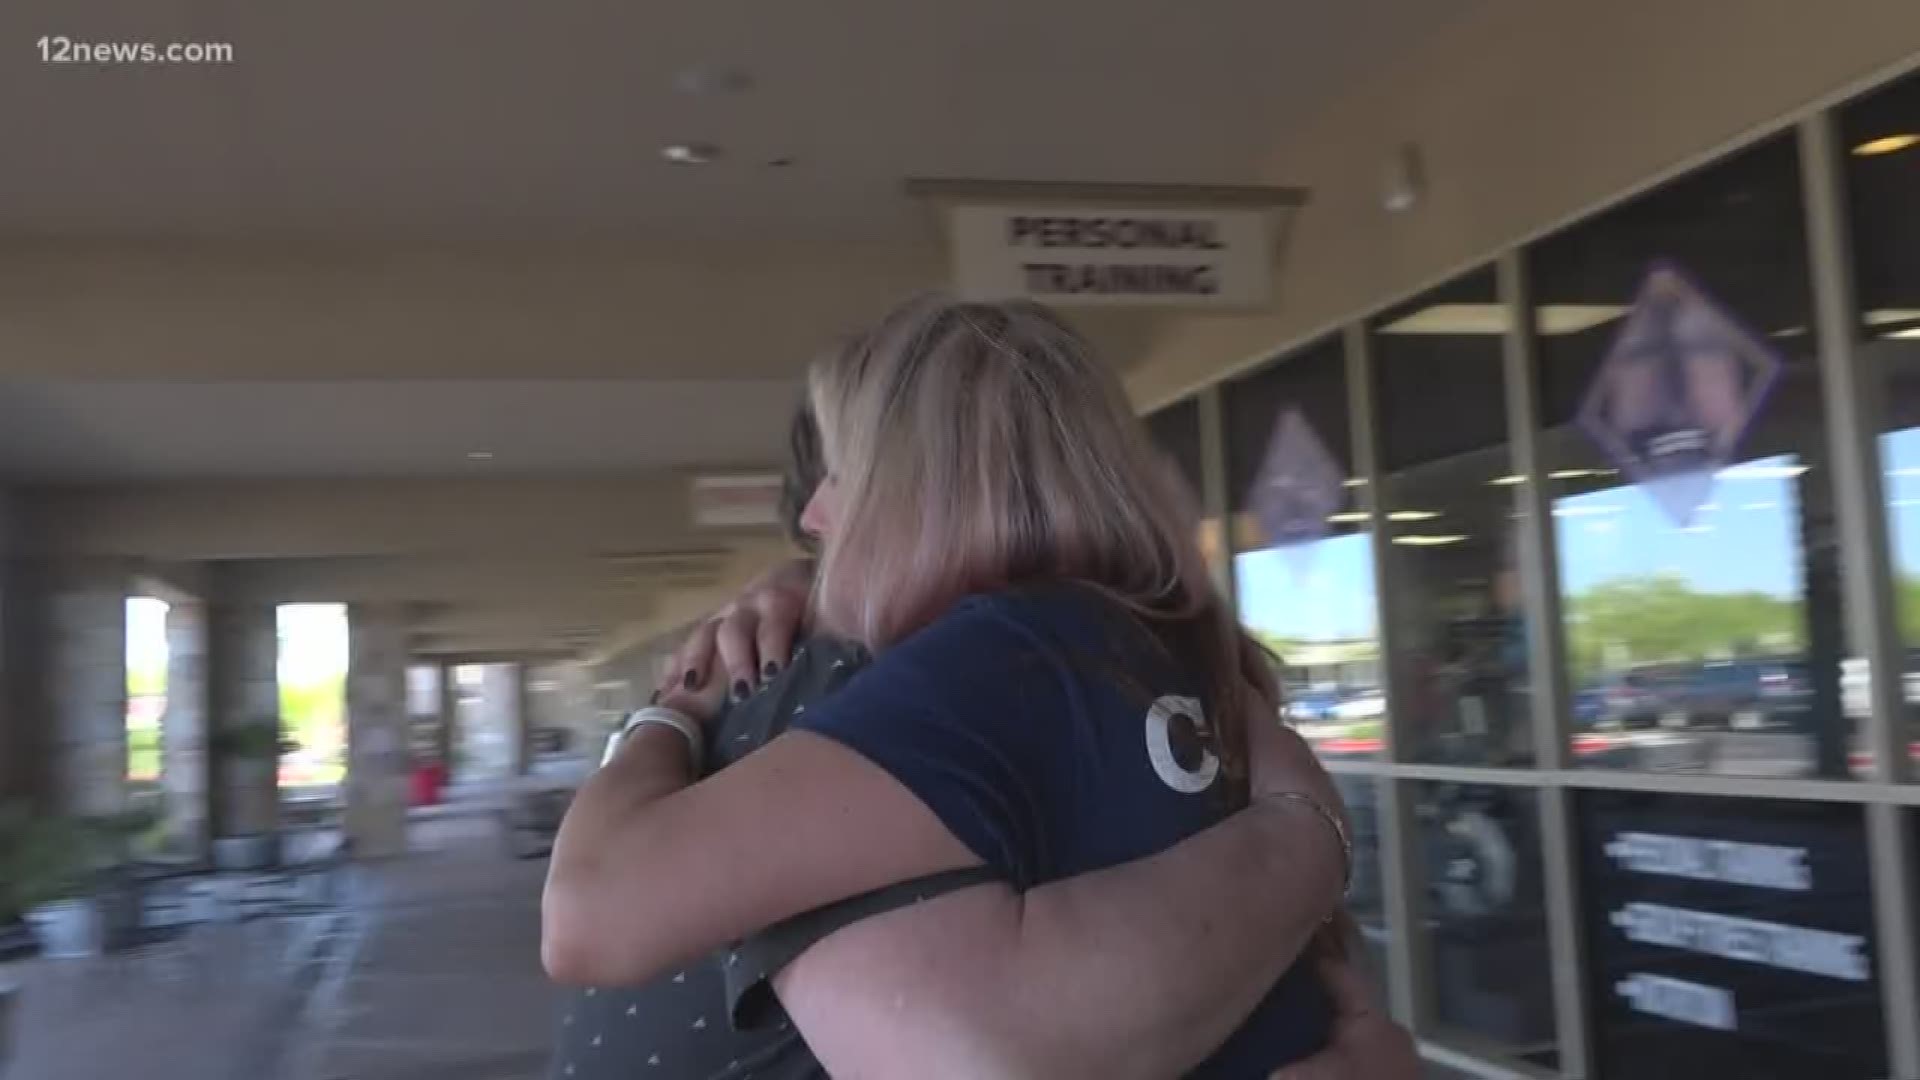 John Jones, 59, was given up for adoption at birth.  When his birth mother changed her mind, she was told the baby had died. In reality, he had been adopted. He met his half sister, Lisa Rast, in Chandler this weekend